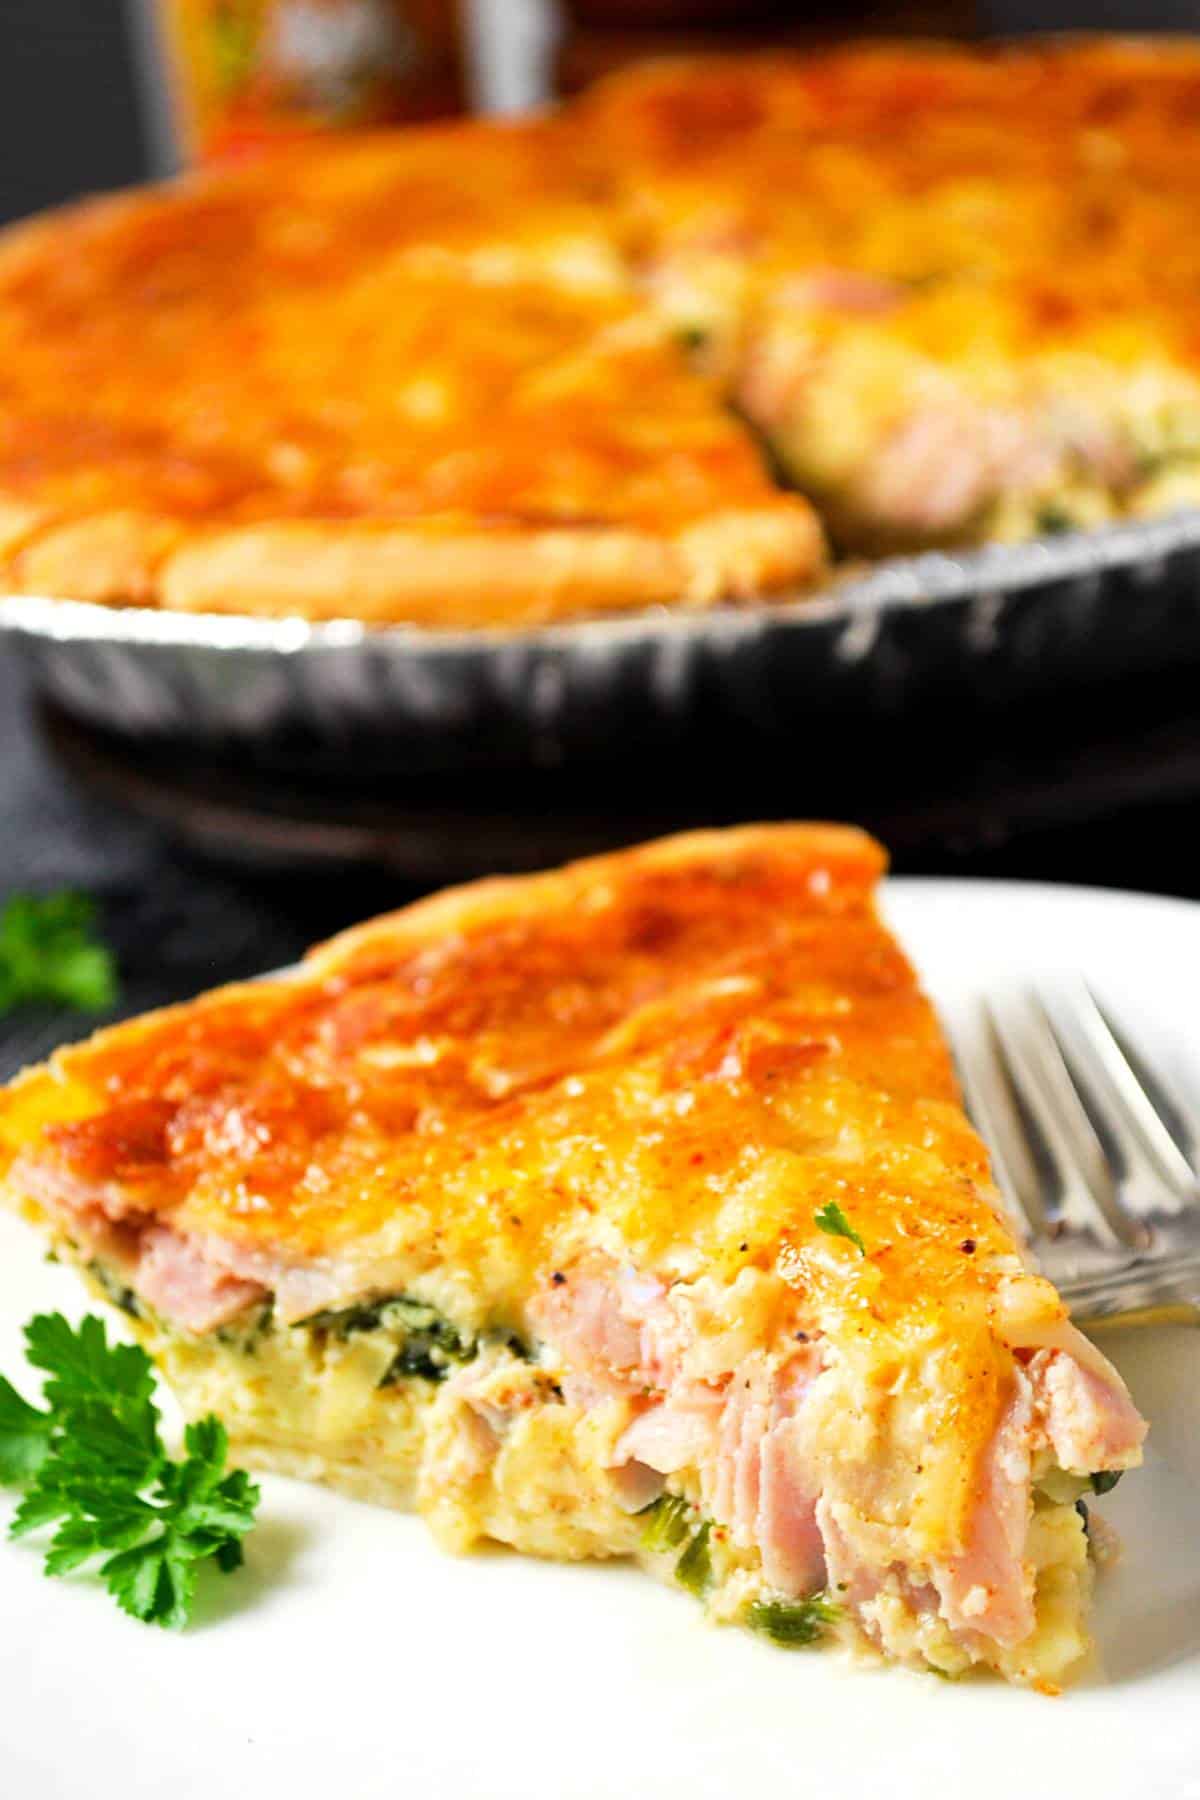 a slice of gluten free quiche on a plate with a sprig of parsley